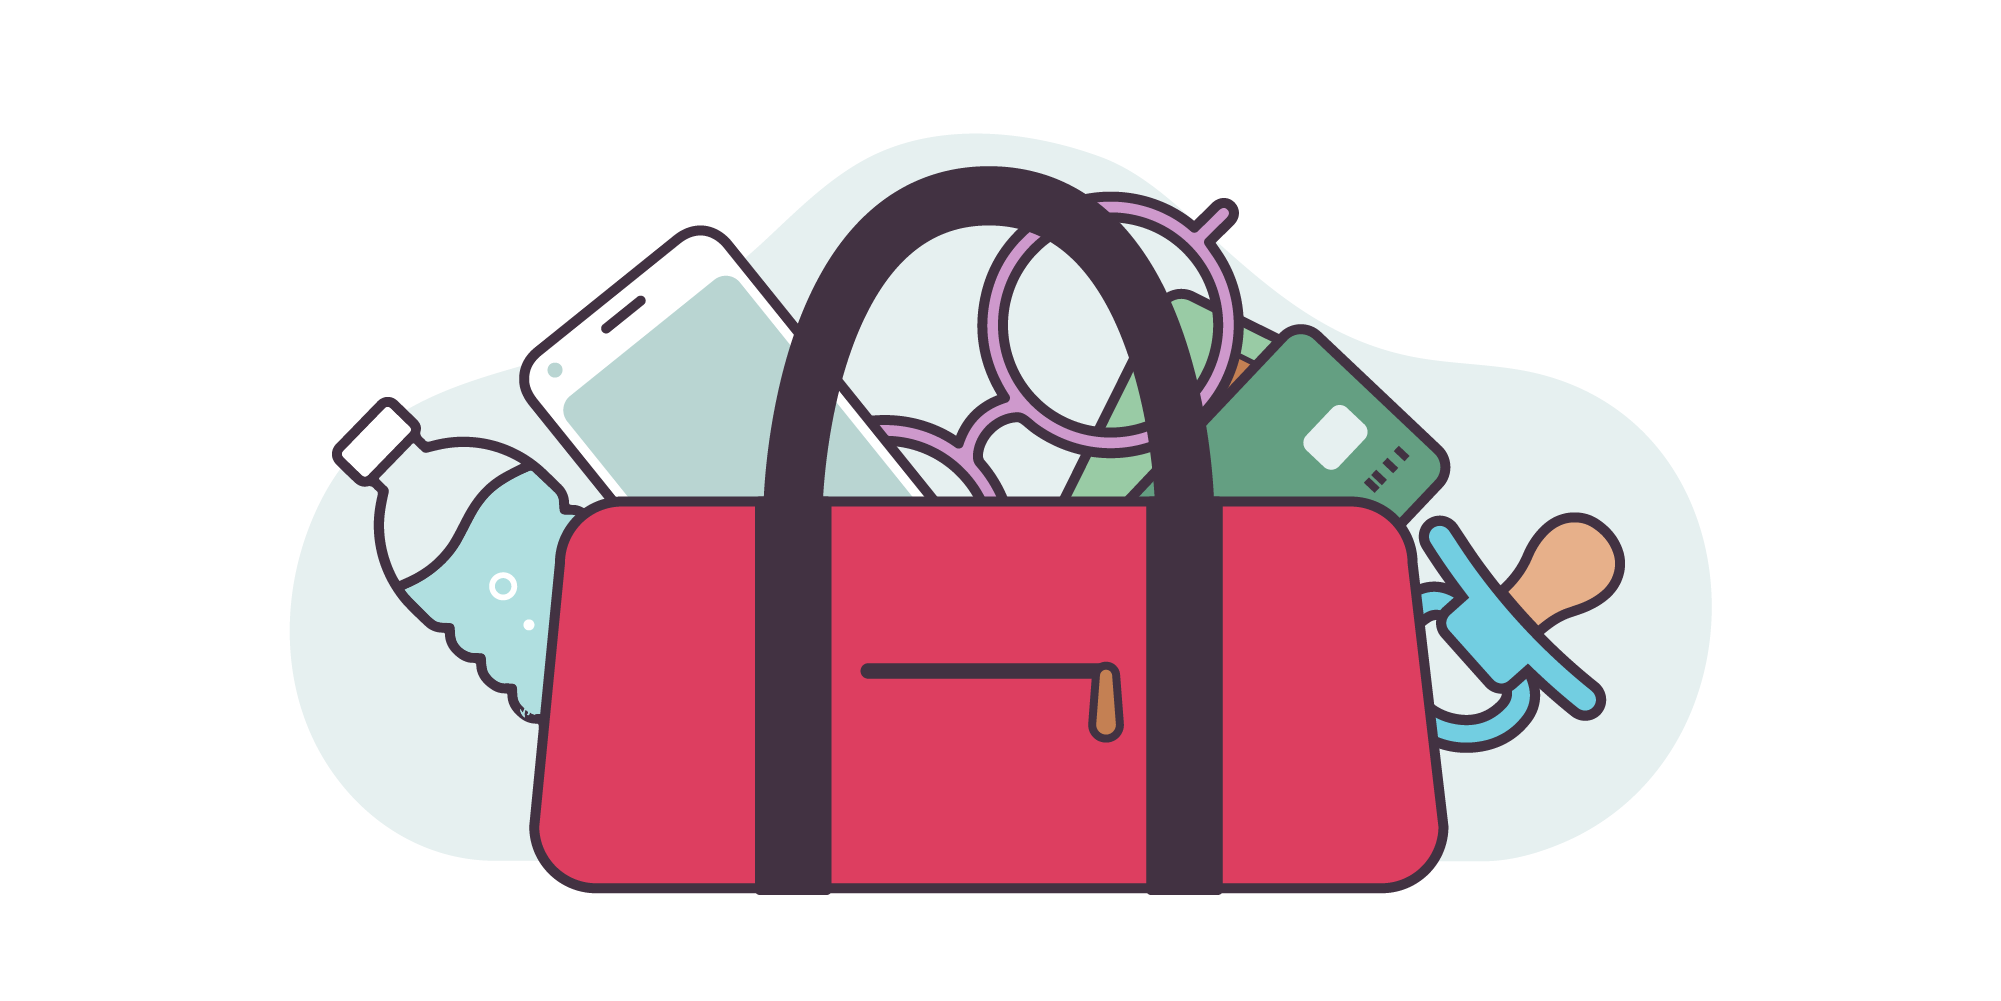 illustration of an emergency kit packed with essentials